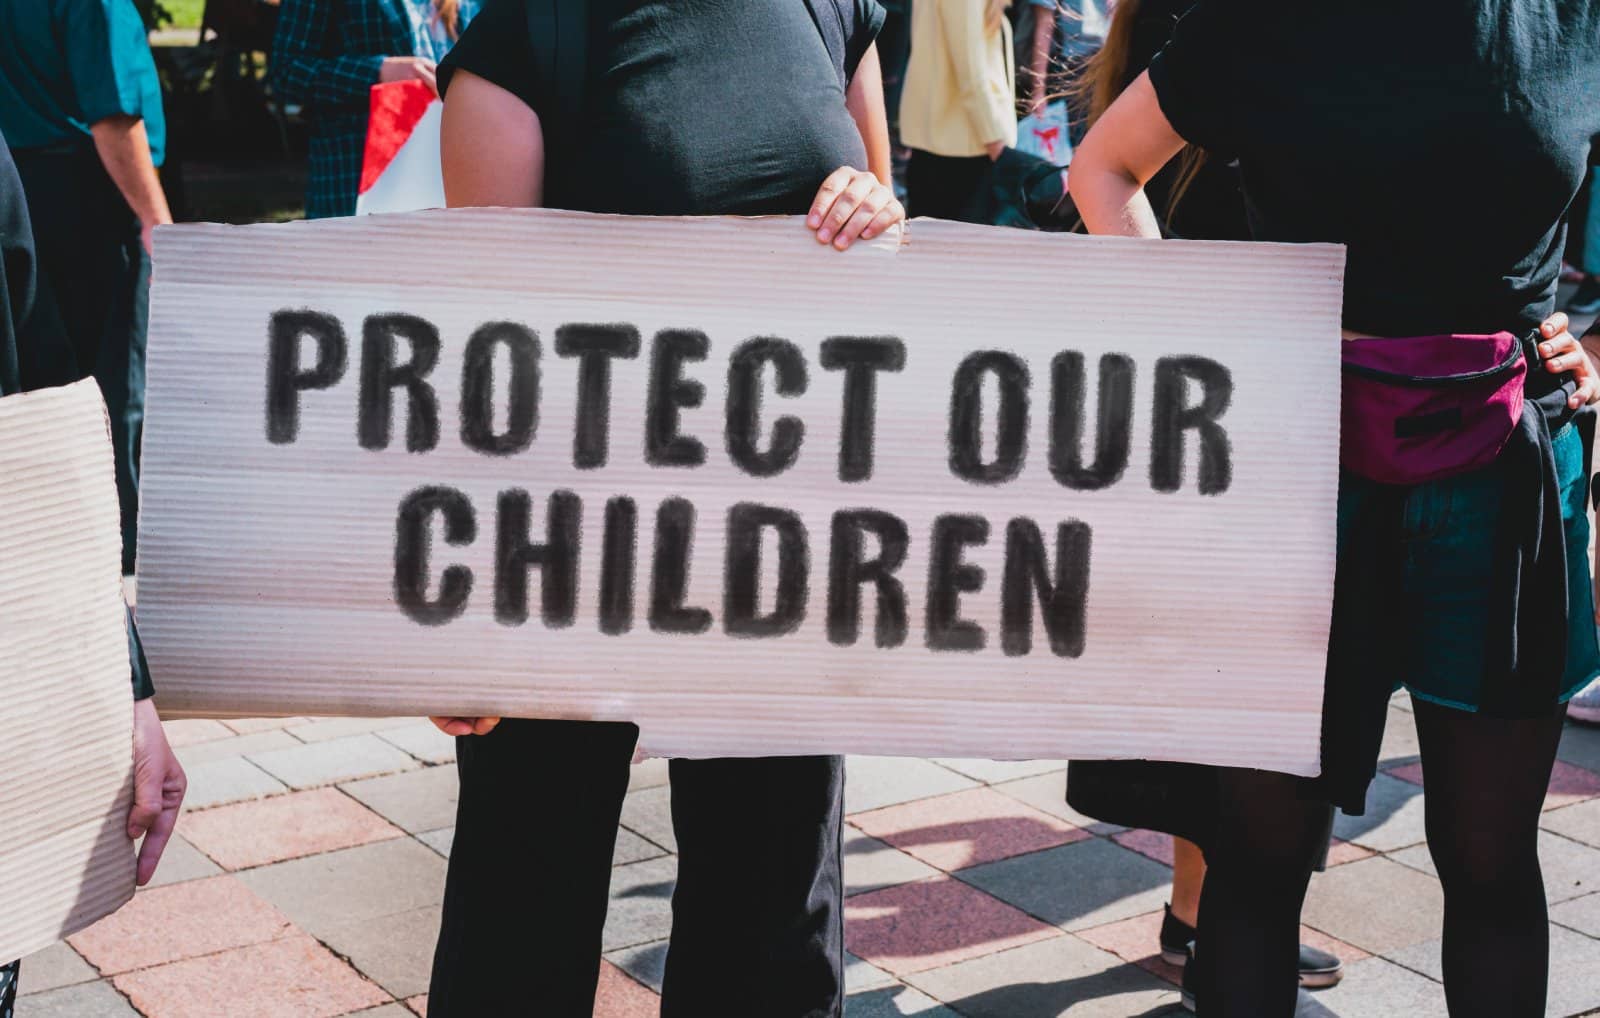 Image Credit: Shutterstock / AndriiKoval <p><span>Turning back to gain a better understanding of where this coming from, we can look back to 2013 when Russia passed its first law against “gay propaganda” to “protect children.”</span></p>